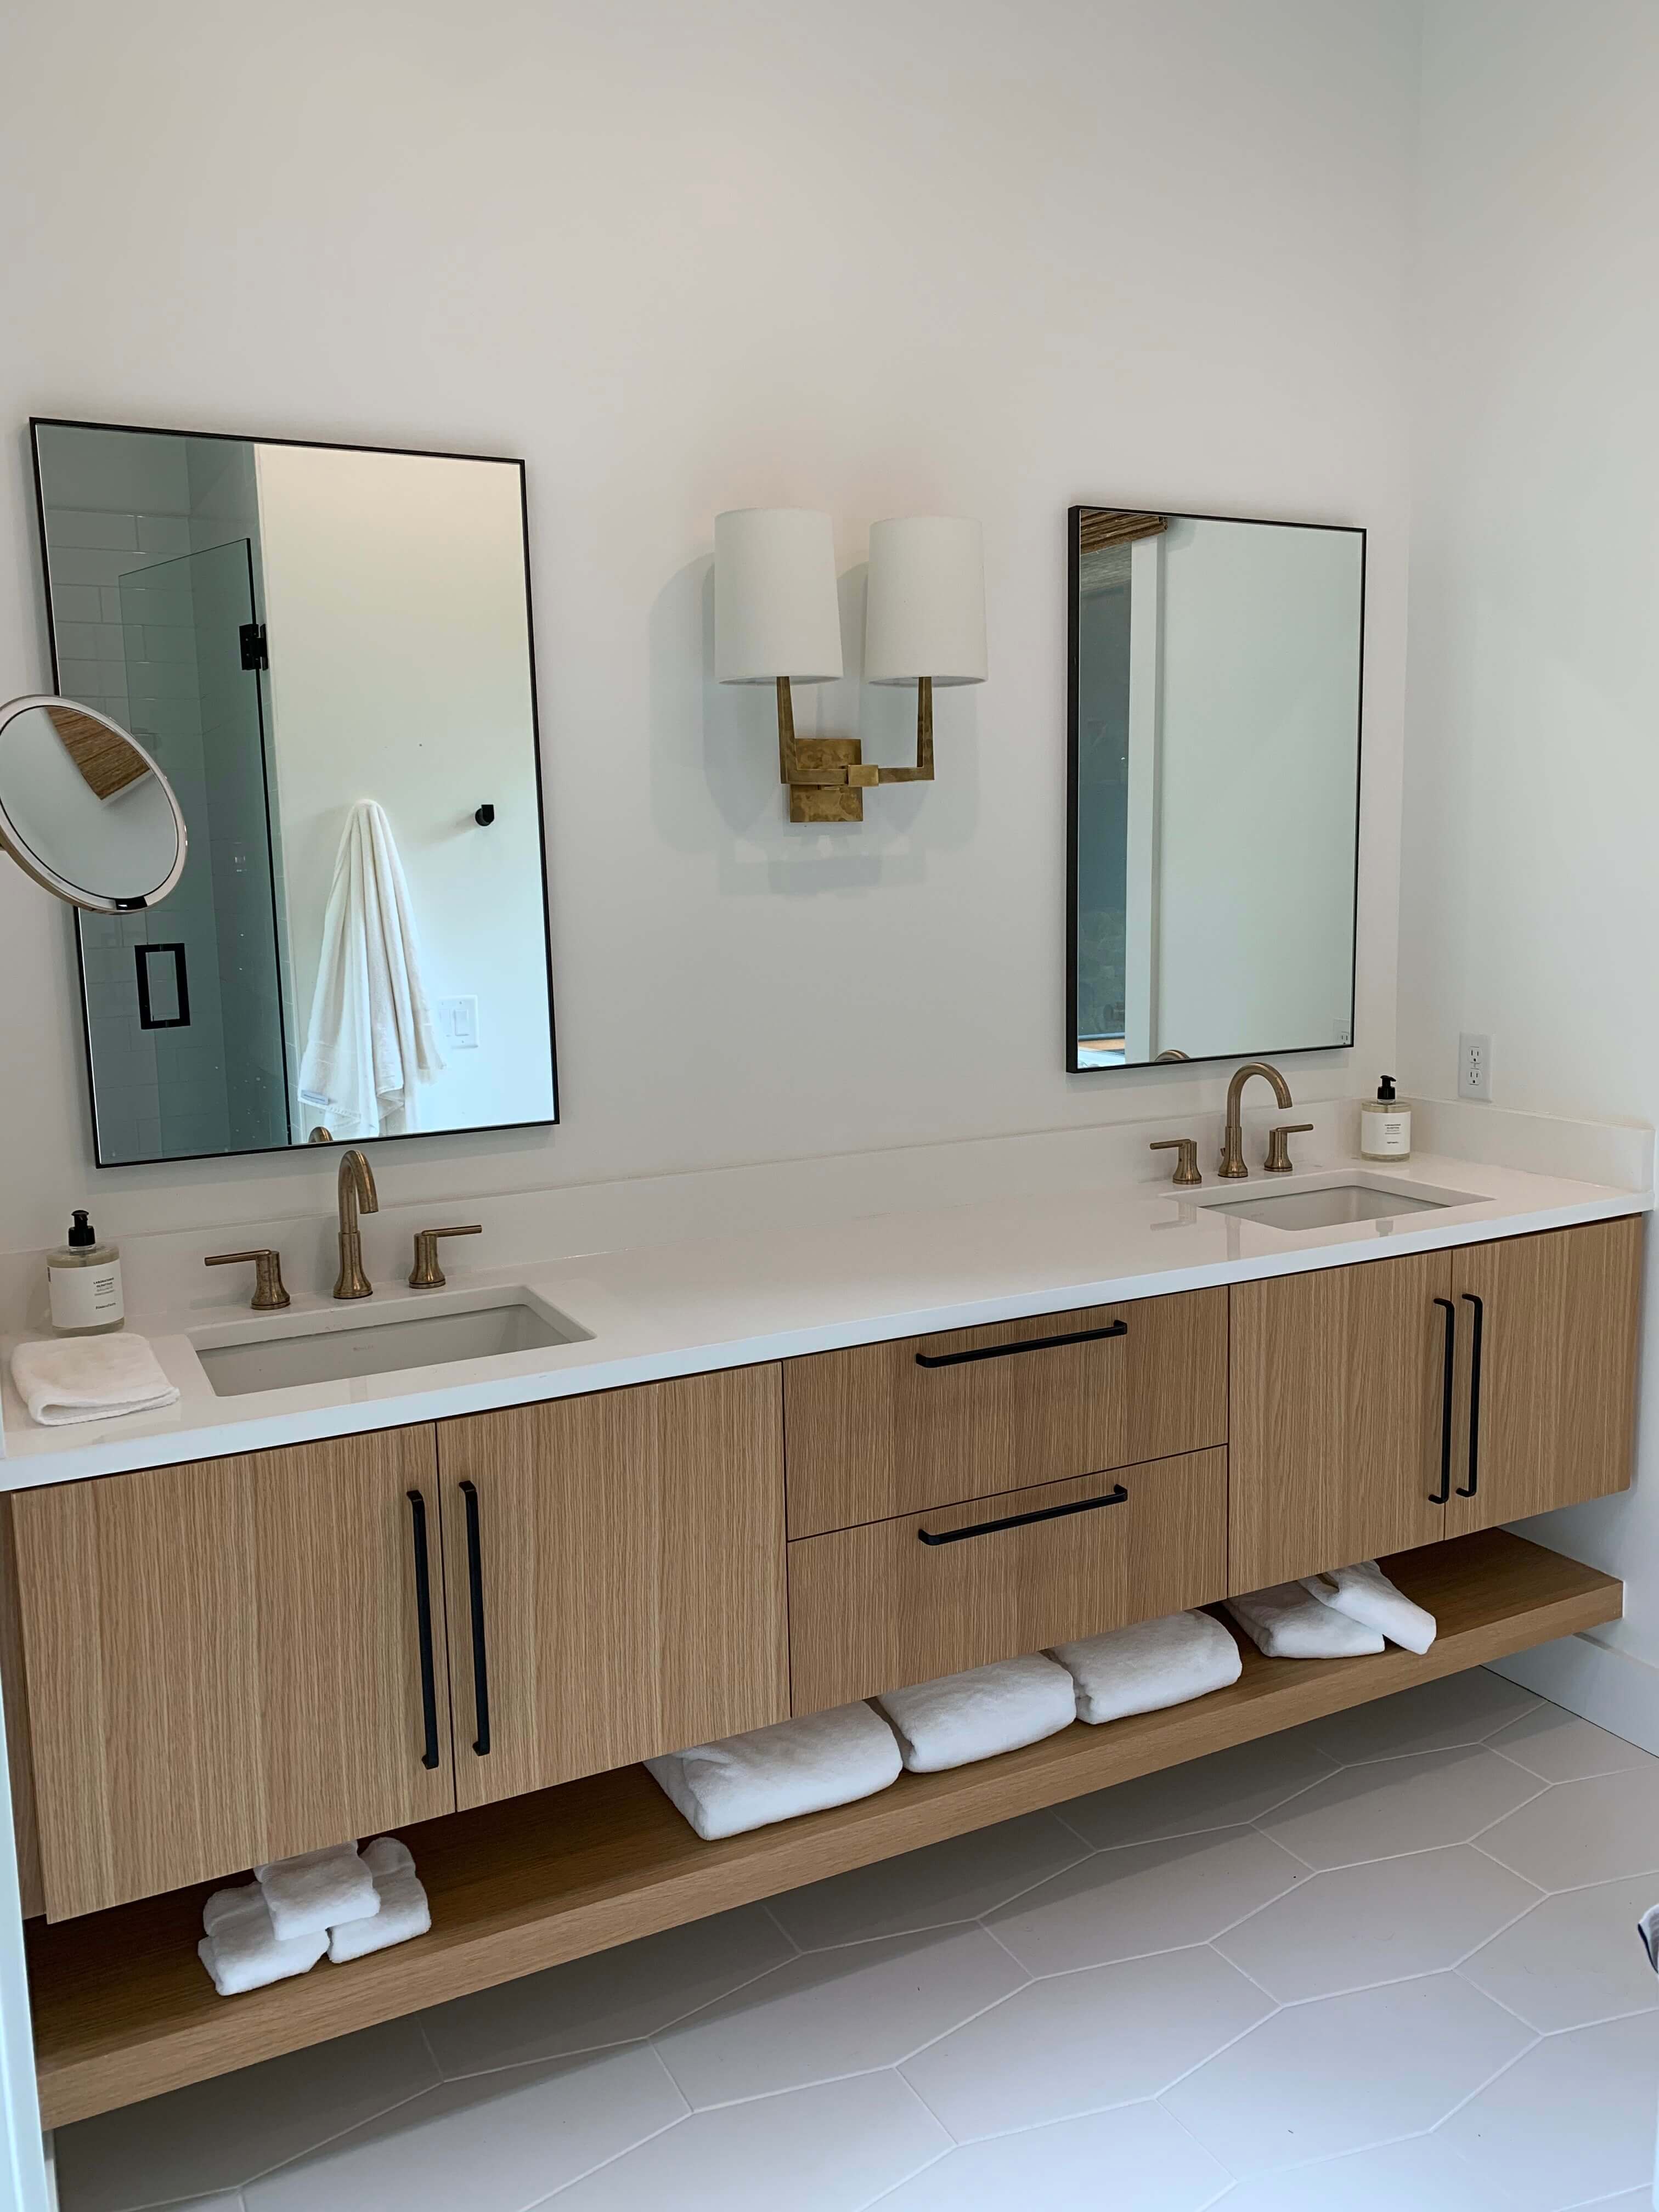 A floating vanity with a floating shelf below featuring double sinks.